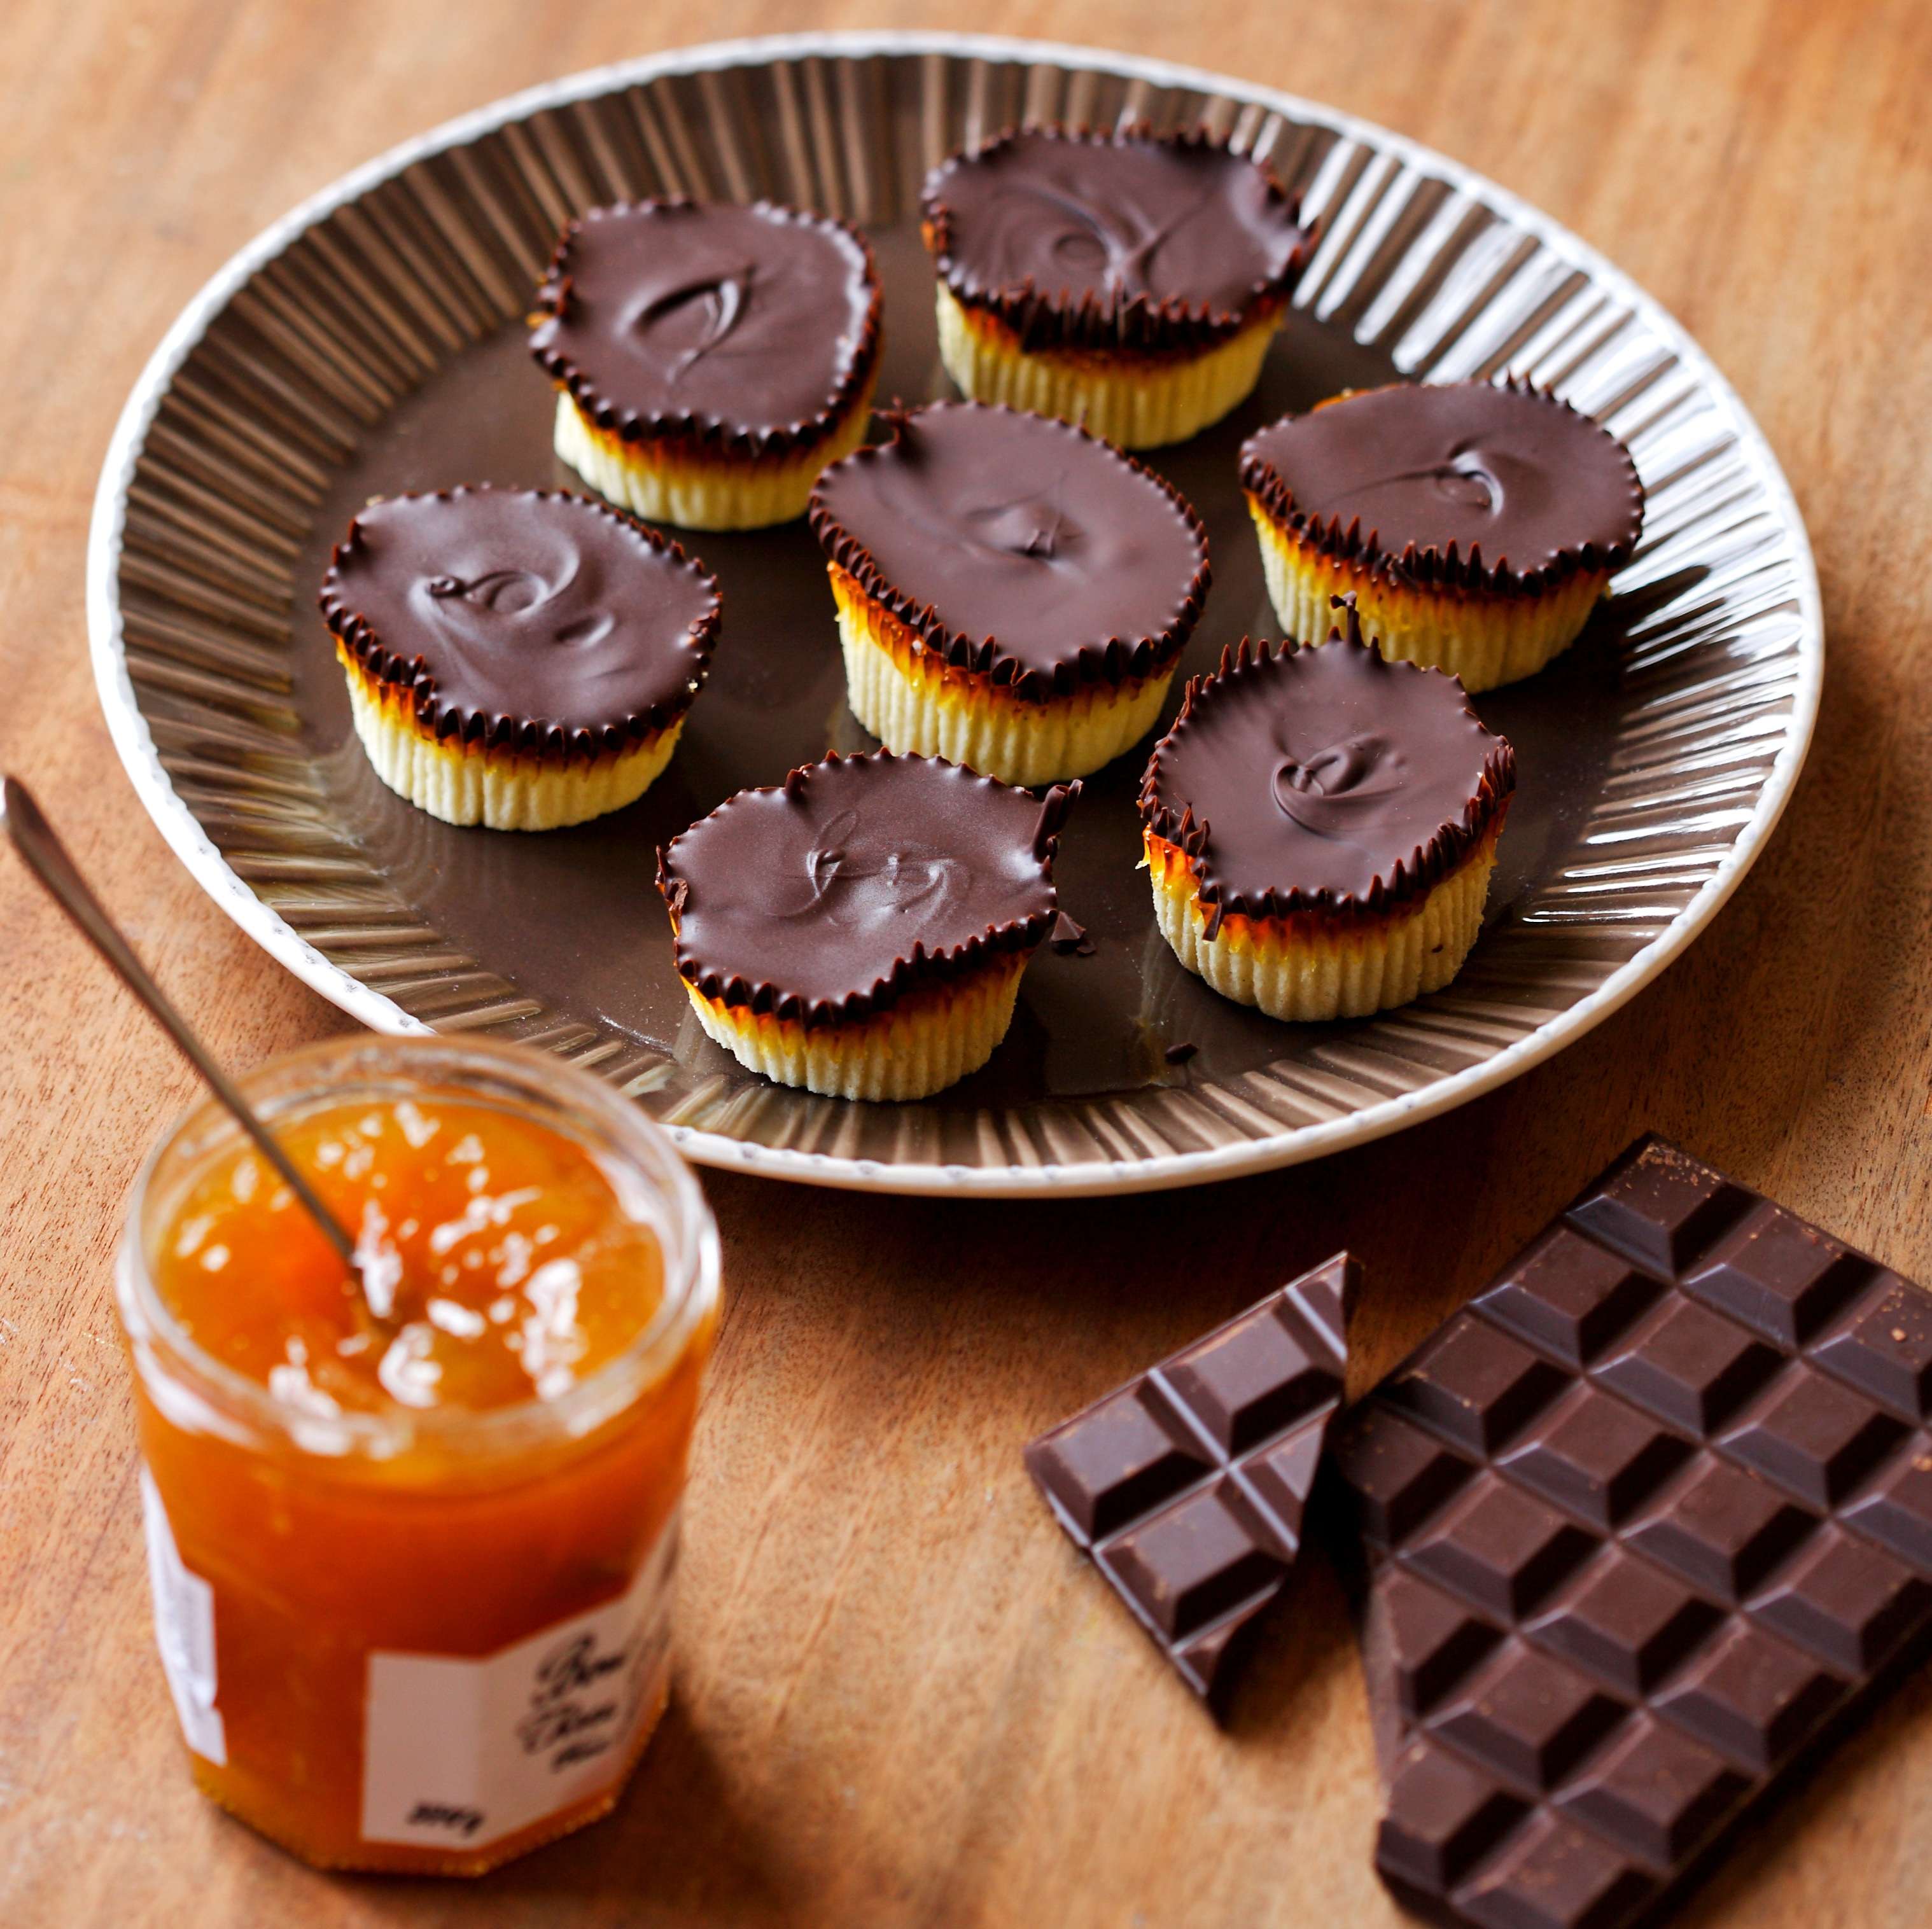 Homemade Jaffa Cakes - Food and Drink News